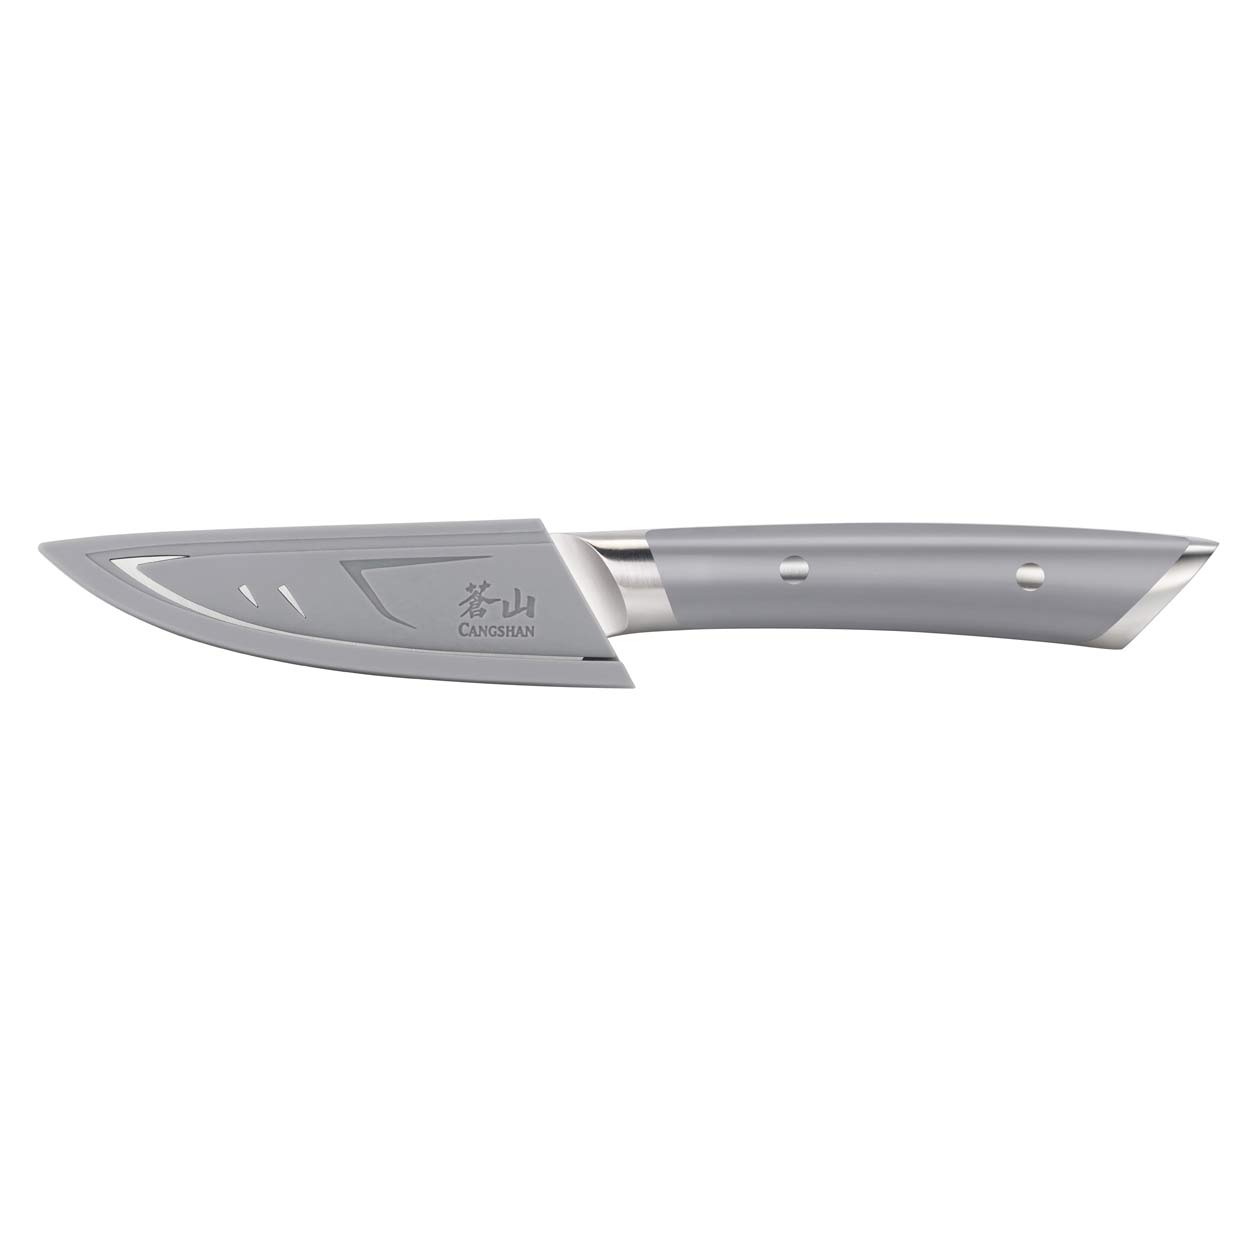 Cangshan Helena 3.5 in Paring Knife Gray Kitchen Knives 12042323